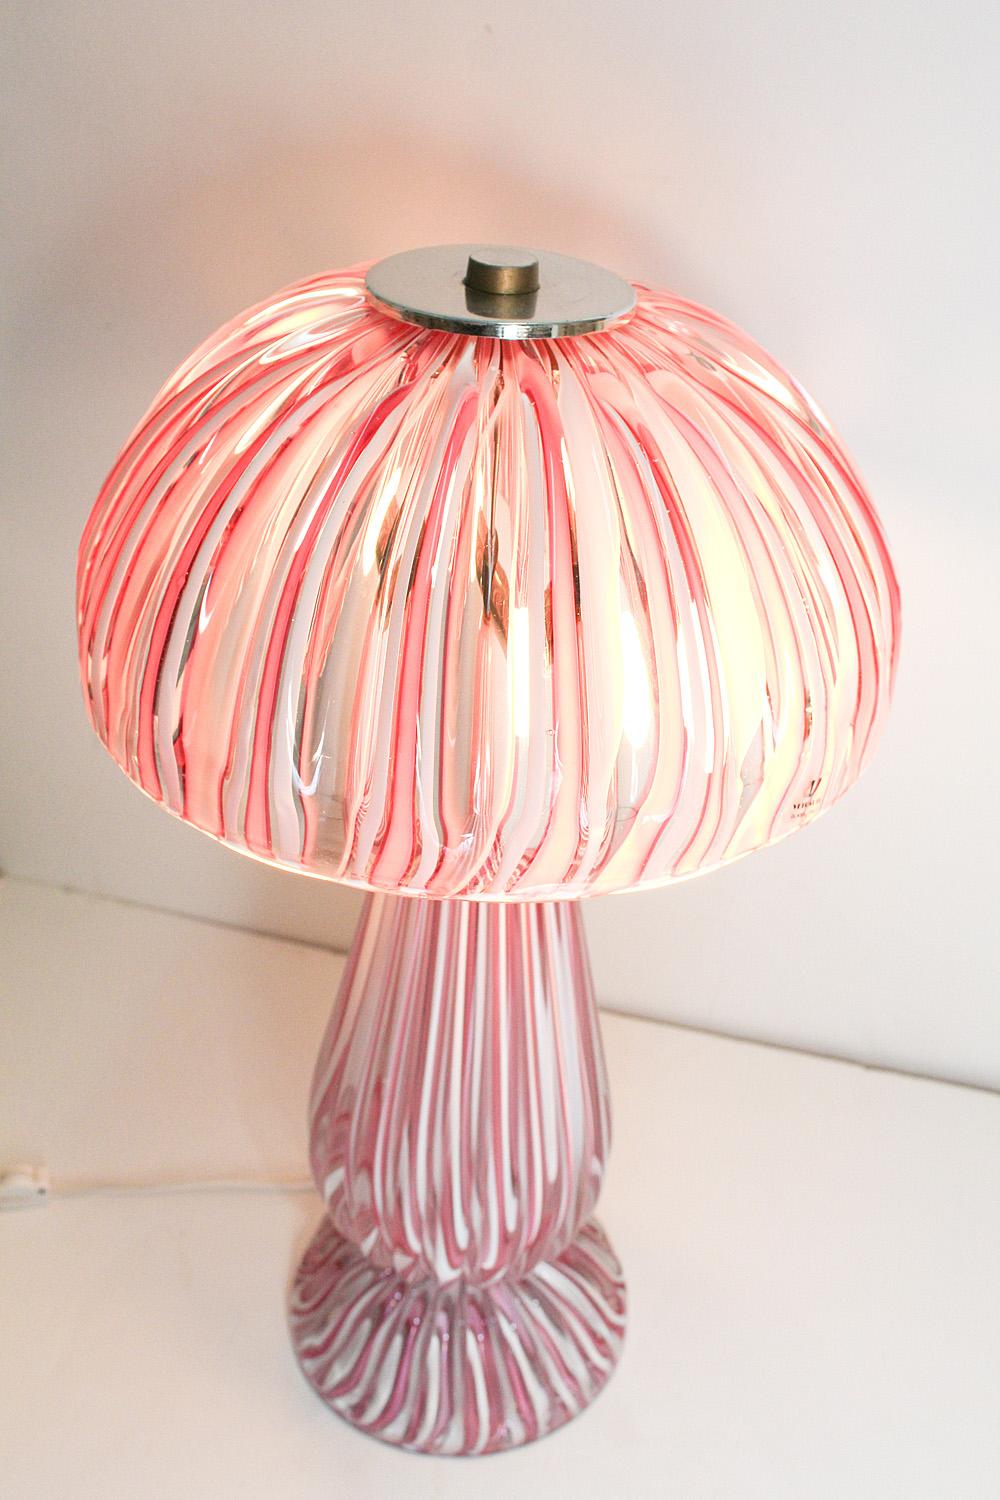 Pair of Pink and White Vetrarti Murano Glass Lamps, Circa 1980 For Sale 3